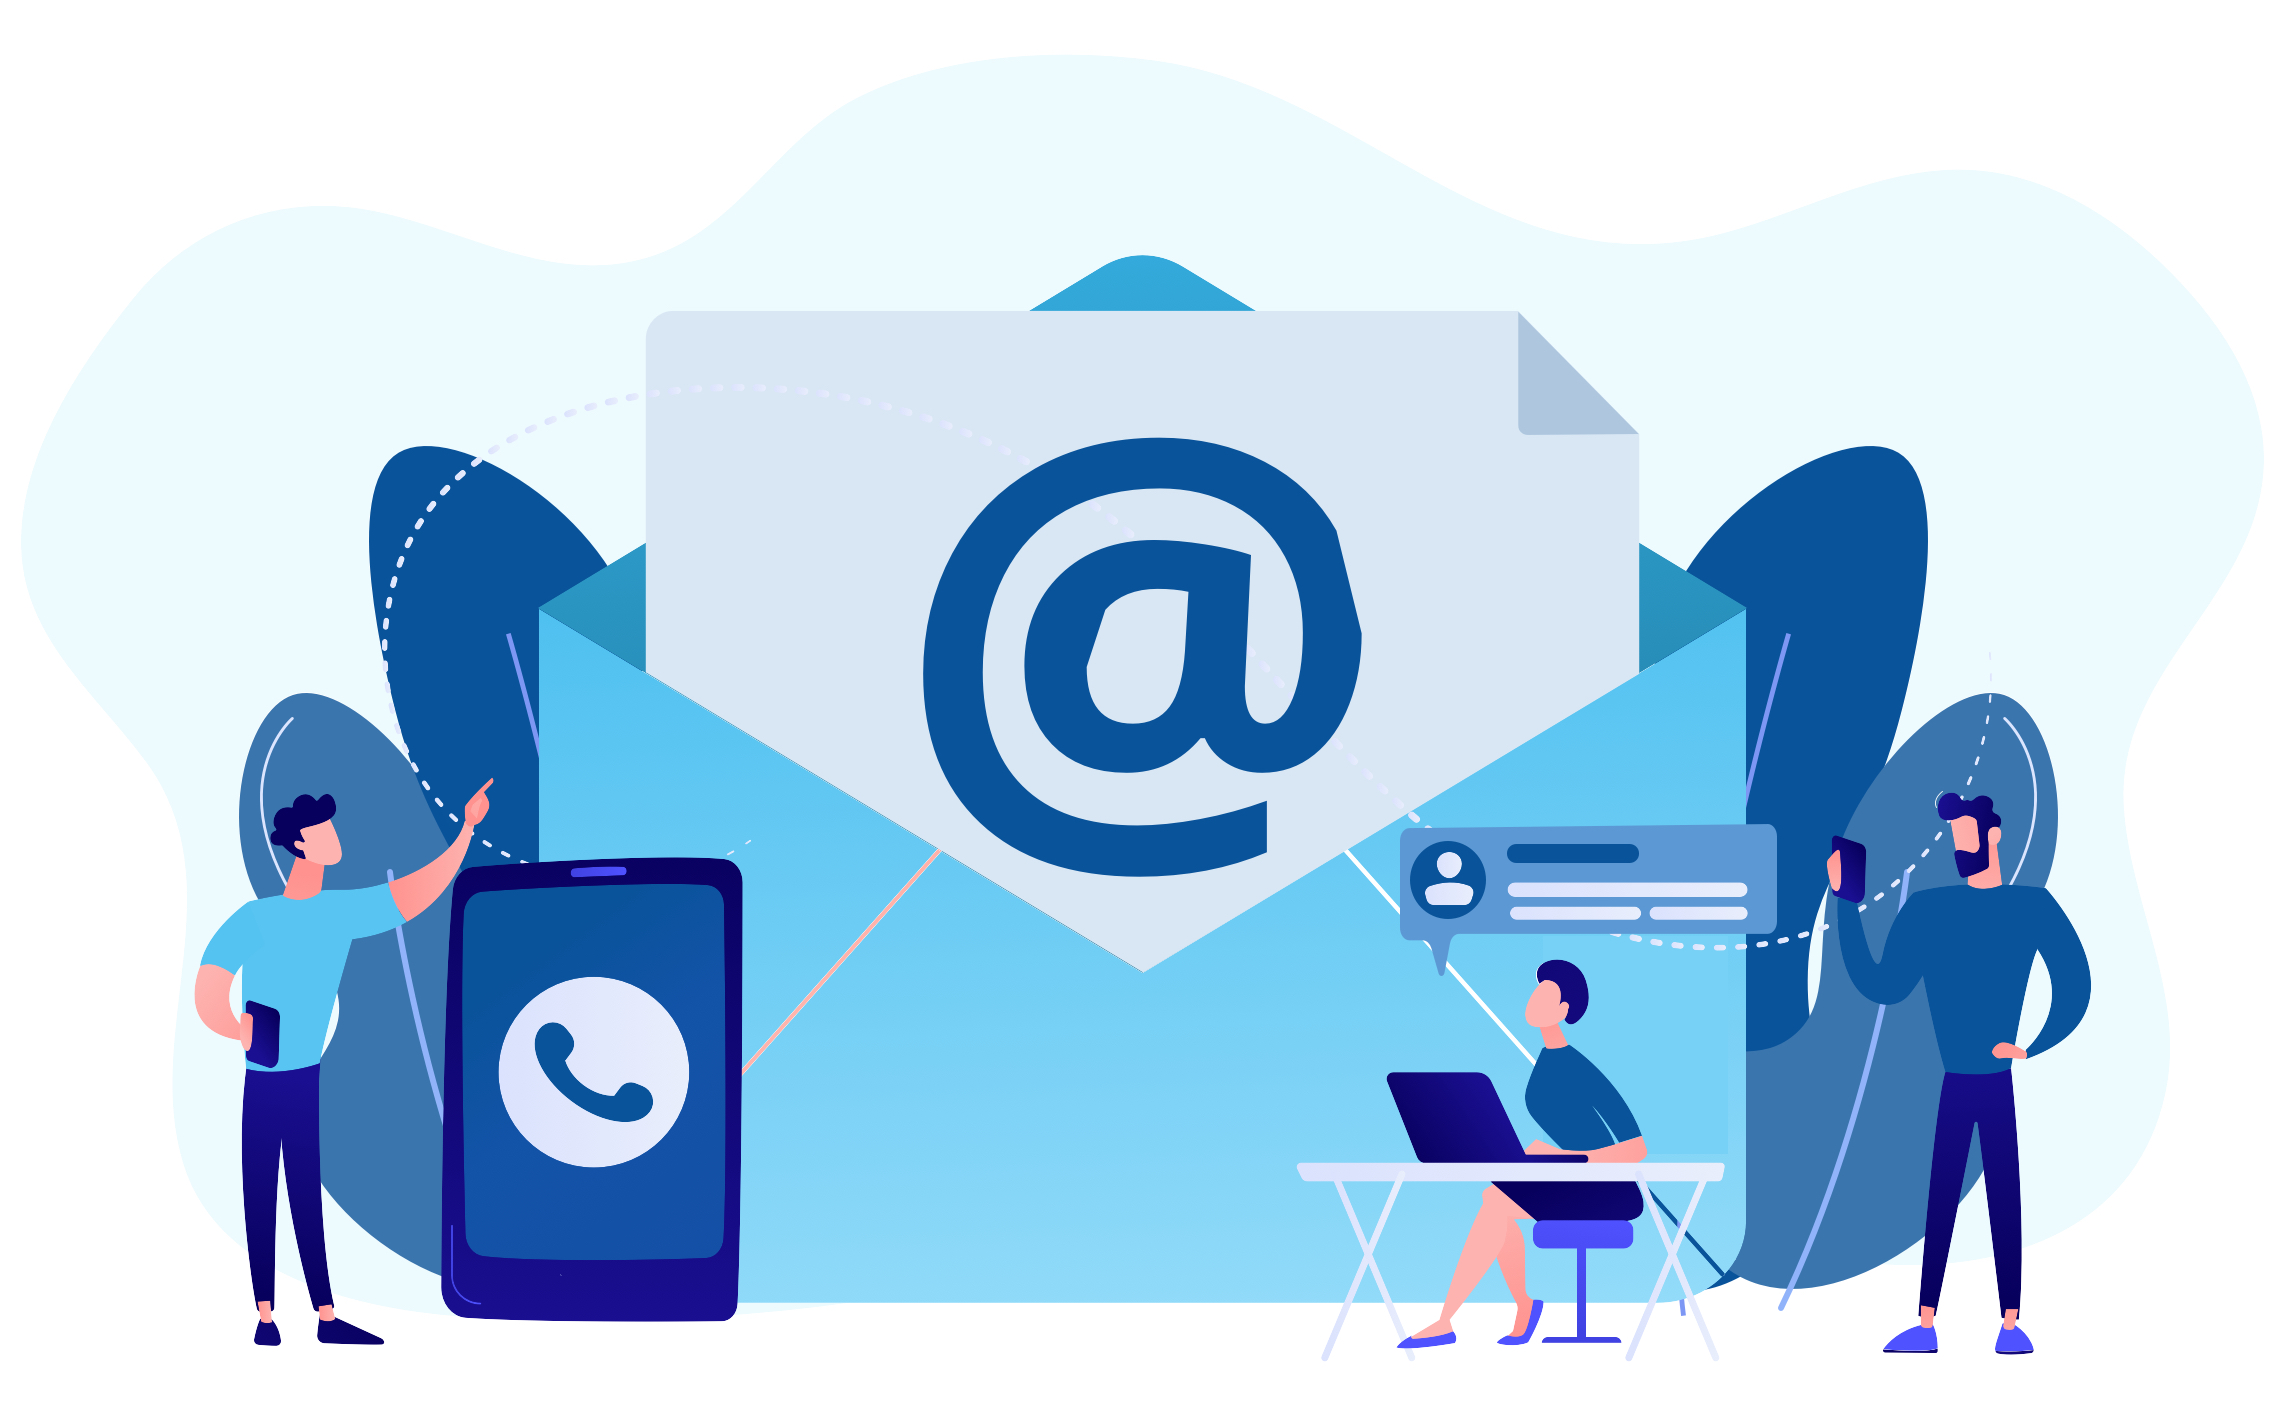 email and contact data enrichment